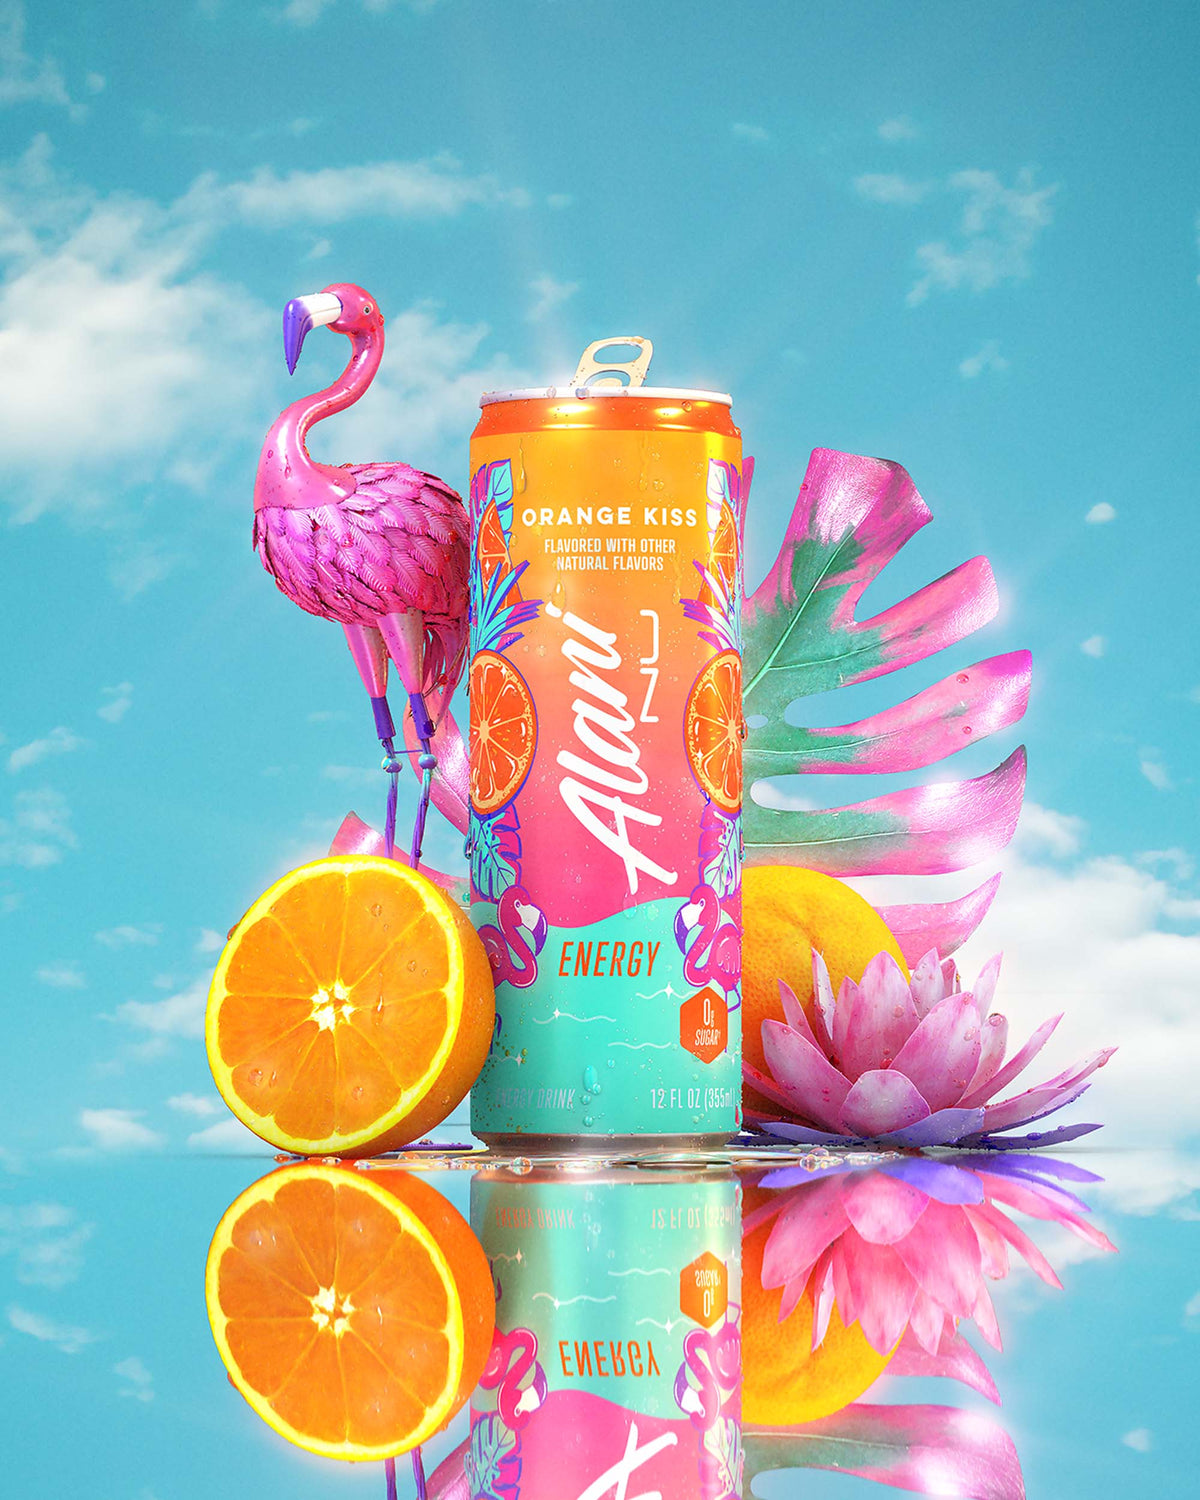 An Orange Kiss Energy Drink, flamingo sculpture, pink florals, and oranges in front of a blue sky. 